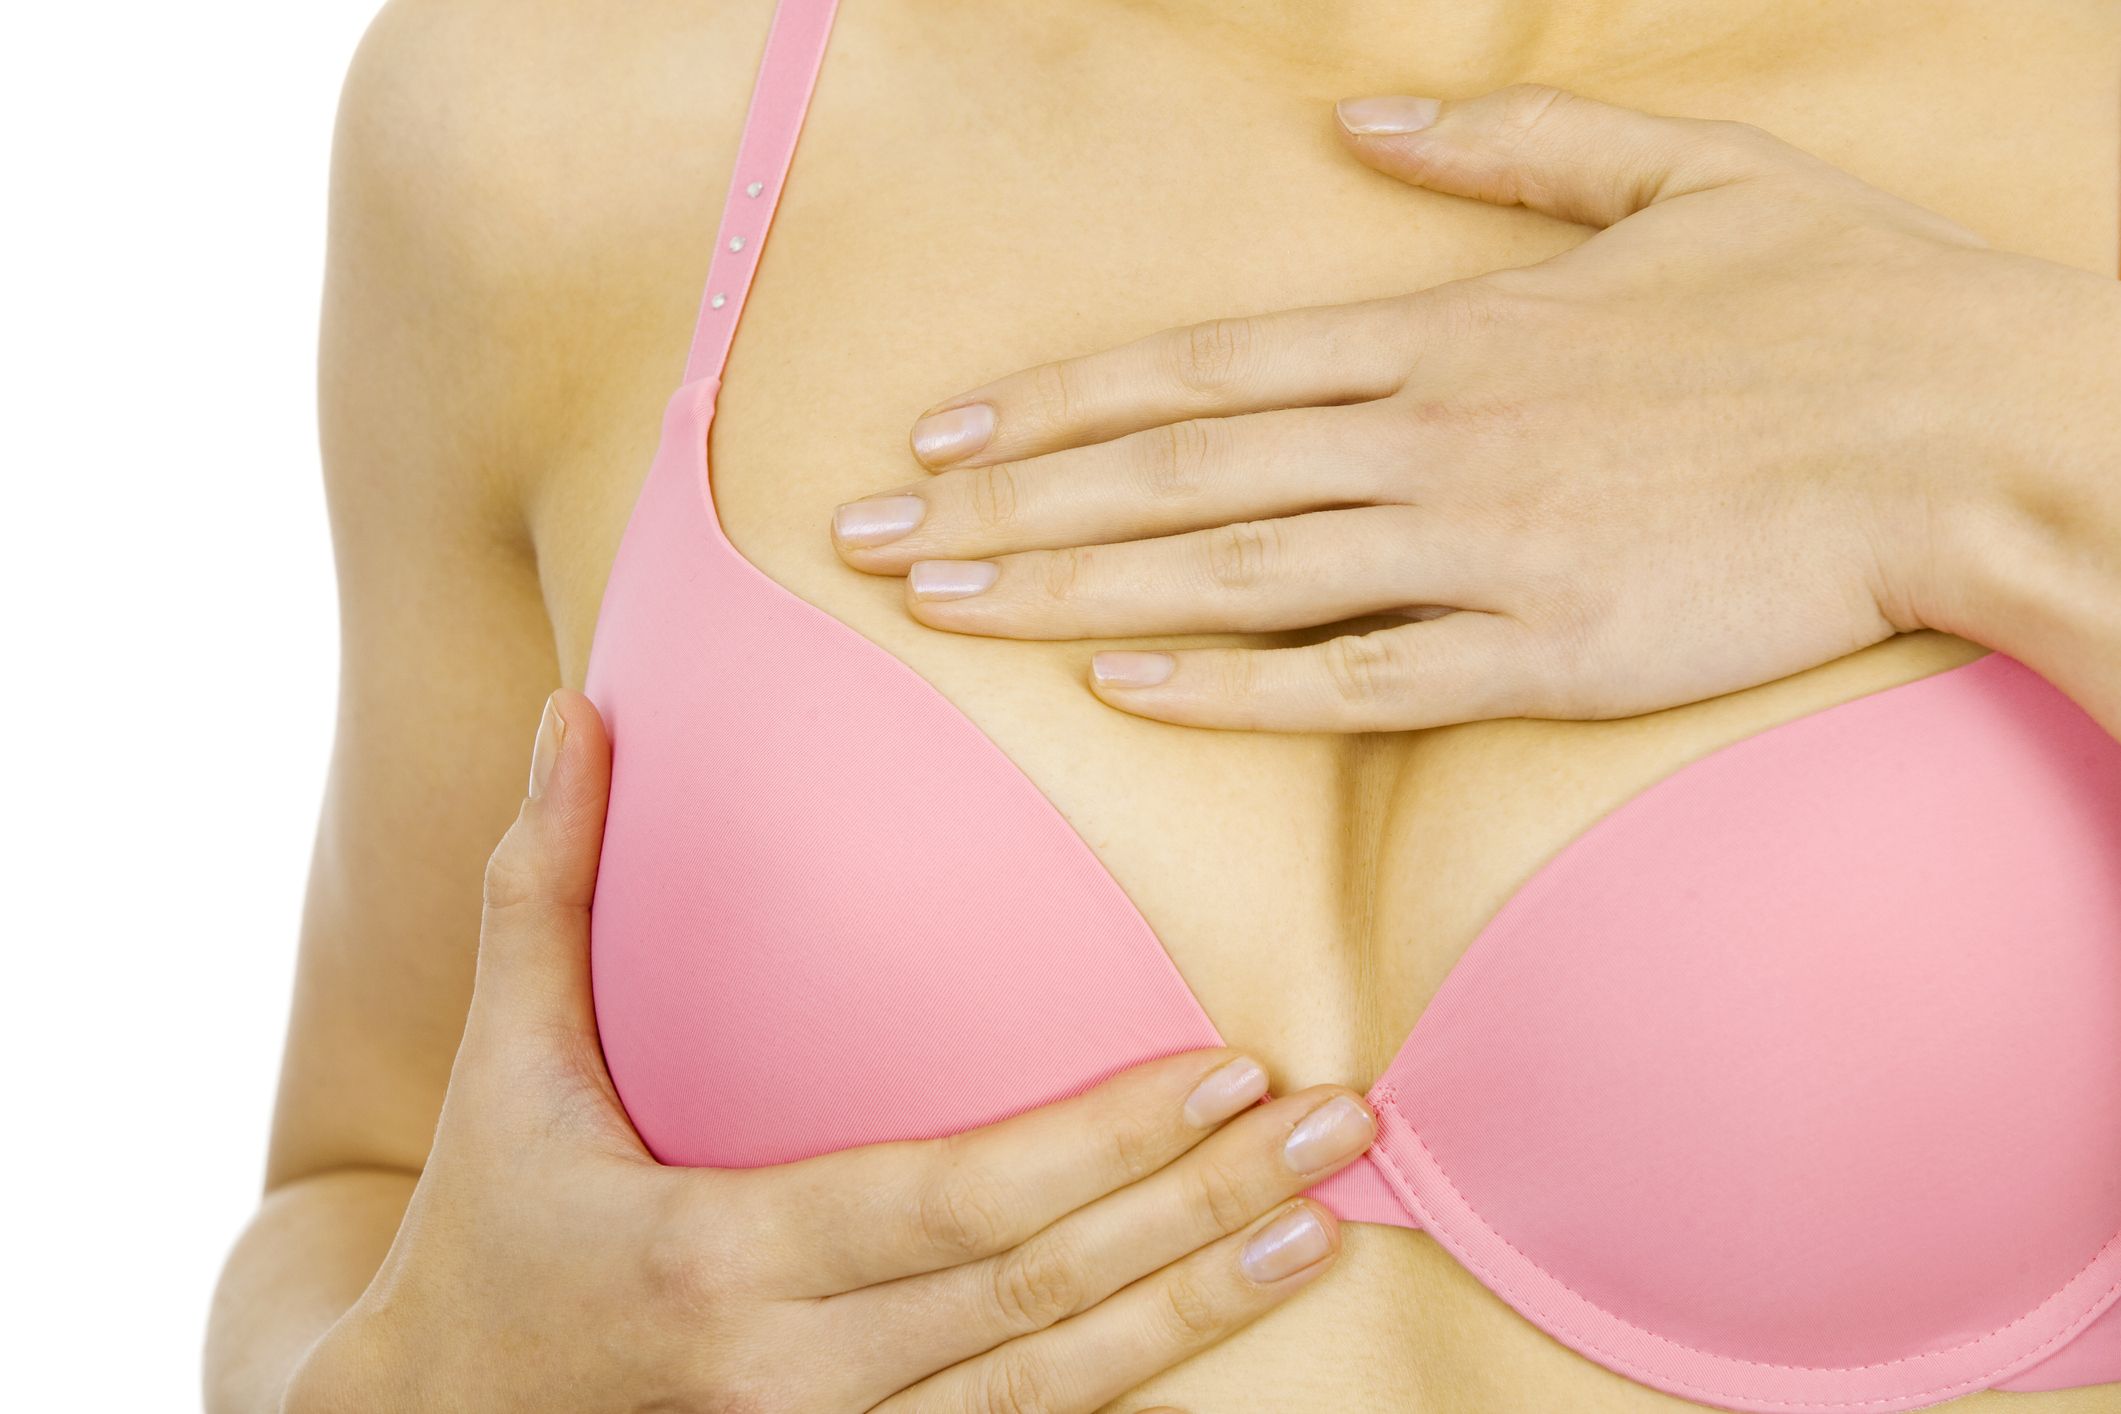 Breast cancer check symptoms, signs and how to check your breasts at every image